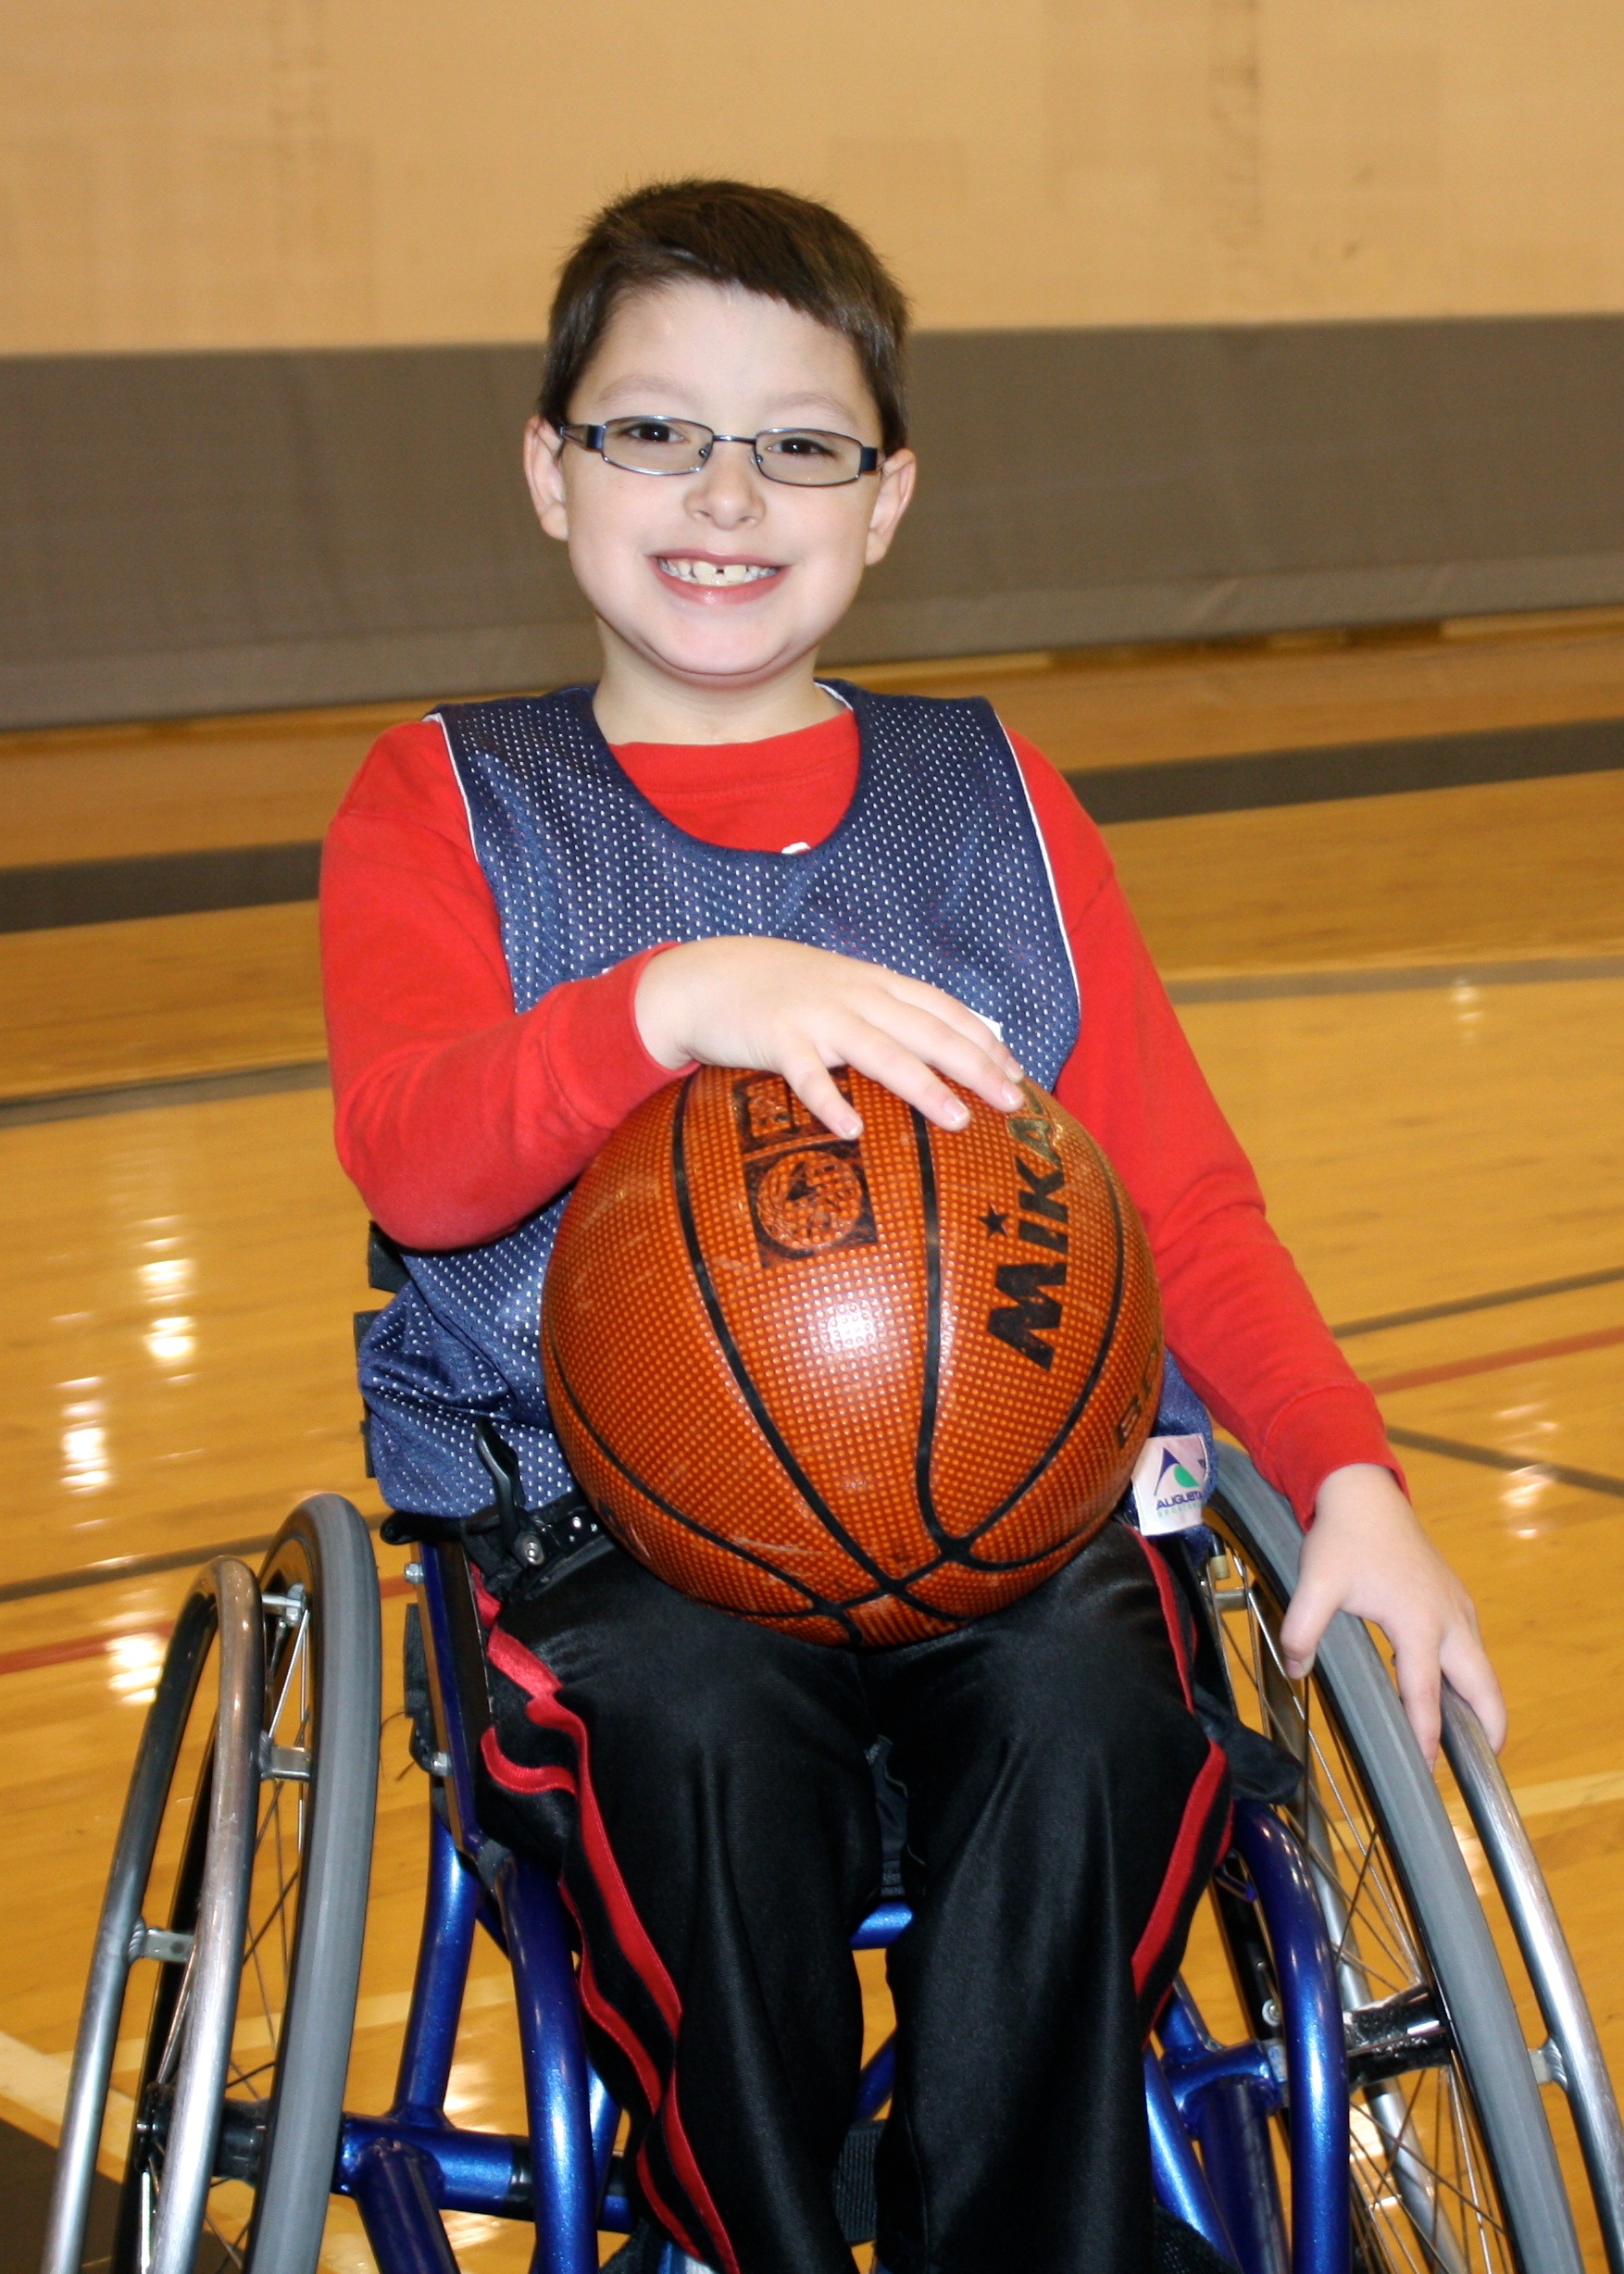 Seth is a young wheelchair basketball player